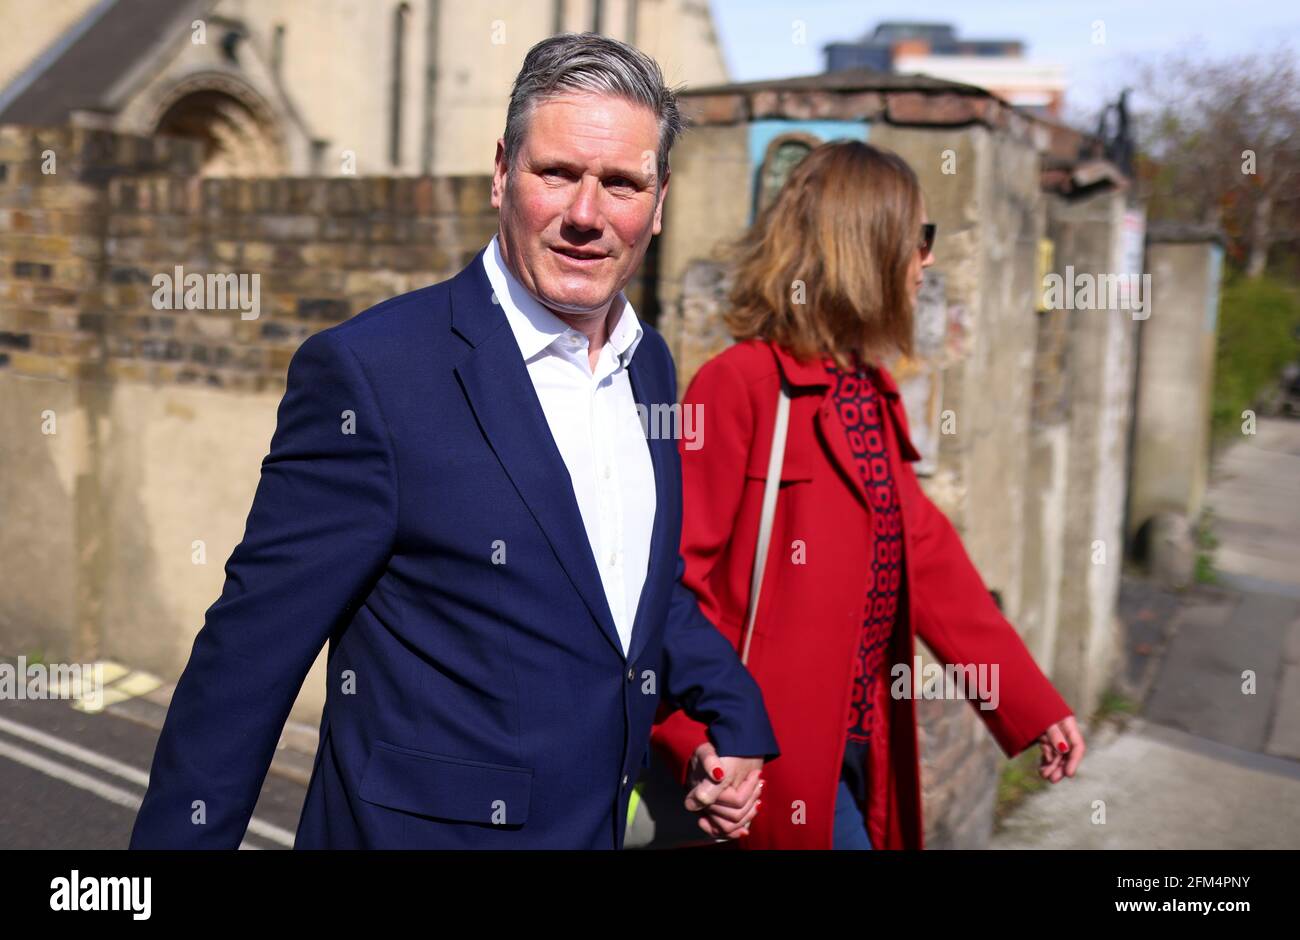 Britain's Labour Party leader Keir Starmer and his wife Victoria walk after casting a vote during local elections, in London, Britain May 6, 2021. REUTERS/Tom Nicholson Stock Photo